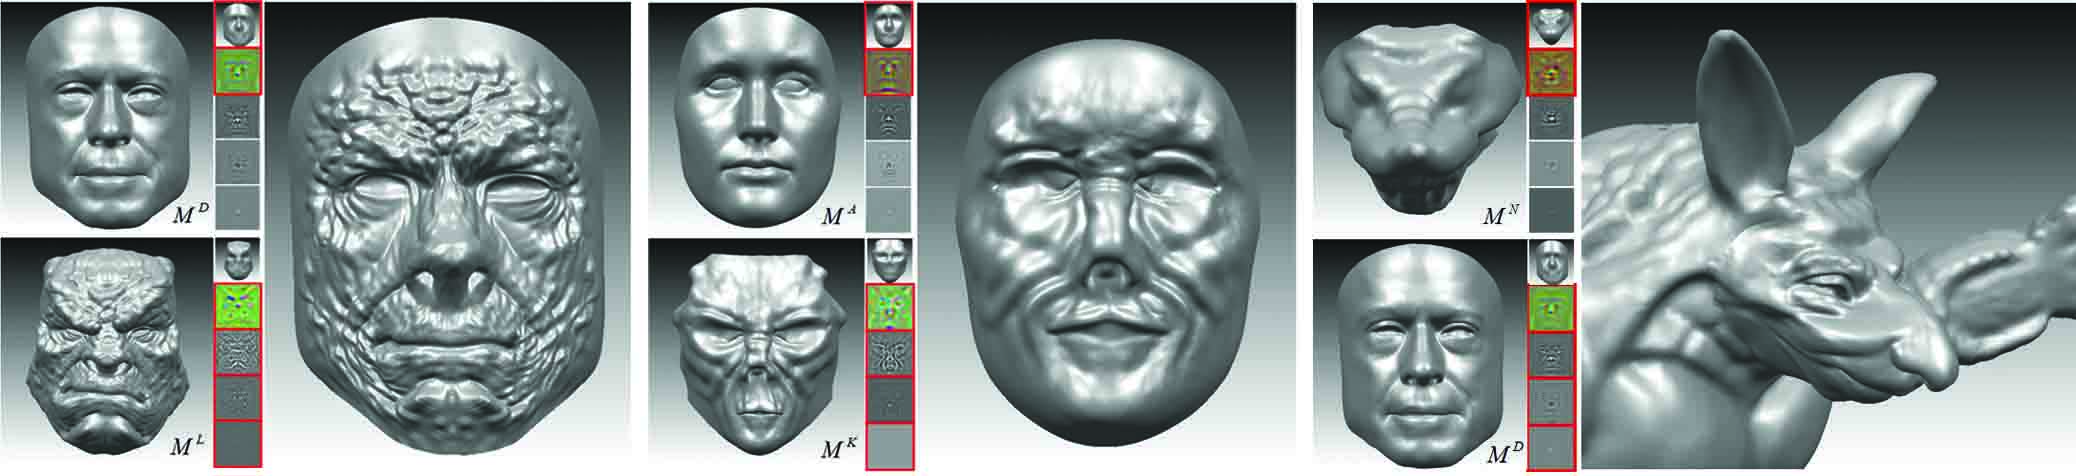 Blending multiscale nonhuman faces. These examples shows the results of transferring the details of a monster face to a human face, an alien face to a human face, and human faces to an armadillo face.